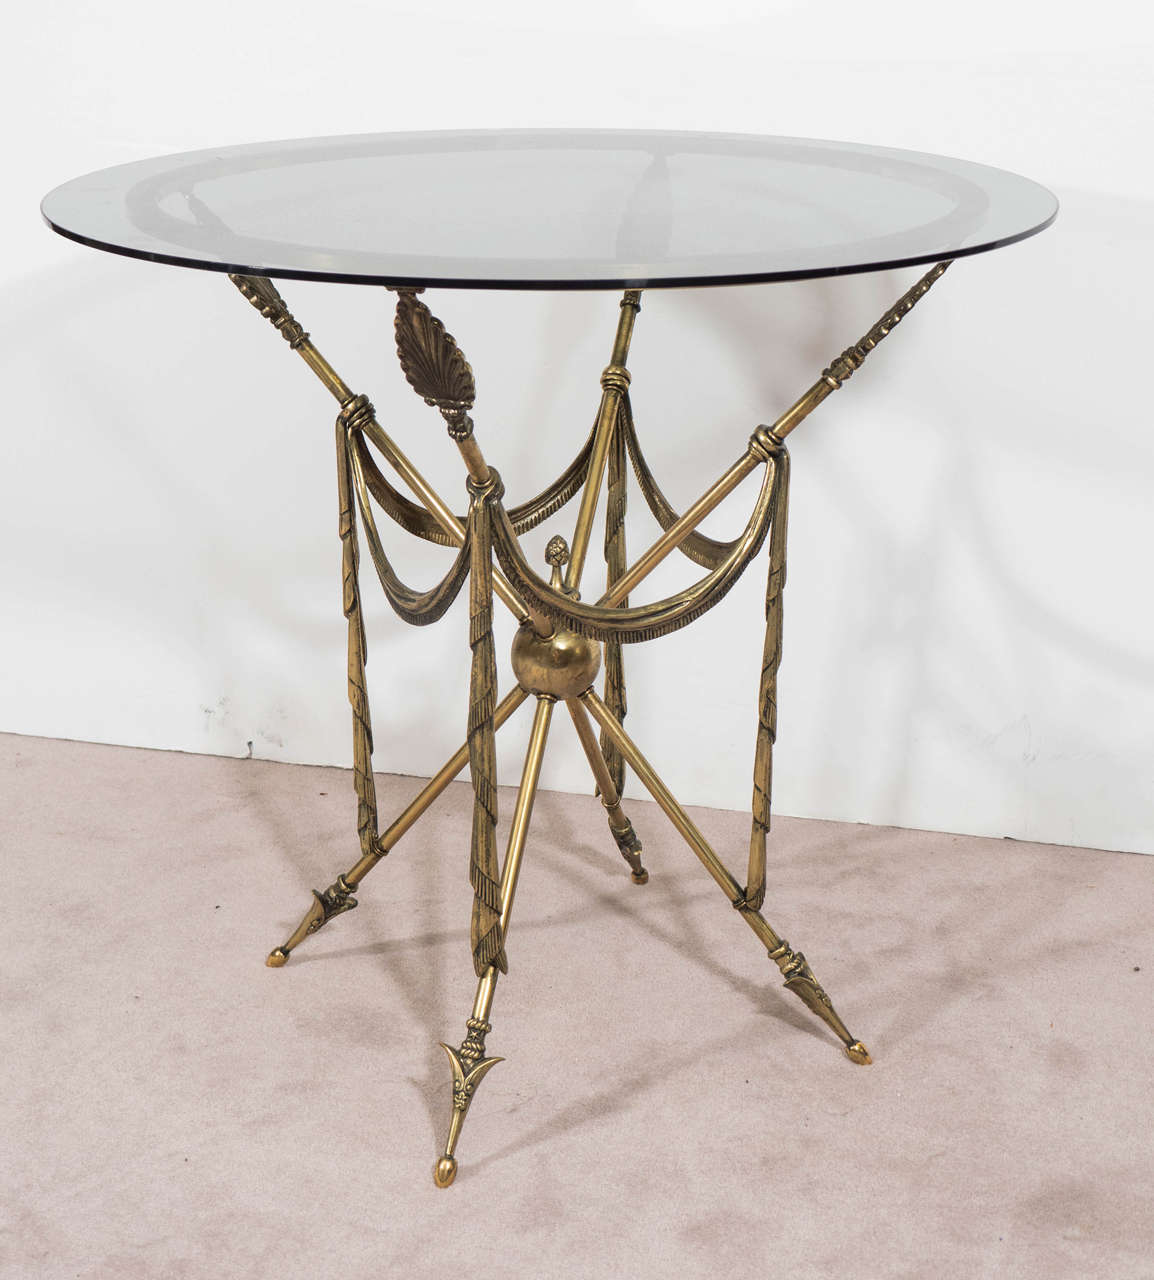 A vintage pair of French brass end or side tables, with arrow motif and neoclassical elements, circa 1950s. Smoked glass tops above a brass ring base, supported by four crossed legs, each stylized with anthemion vanes, terminating into decorative